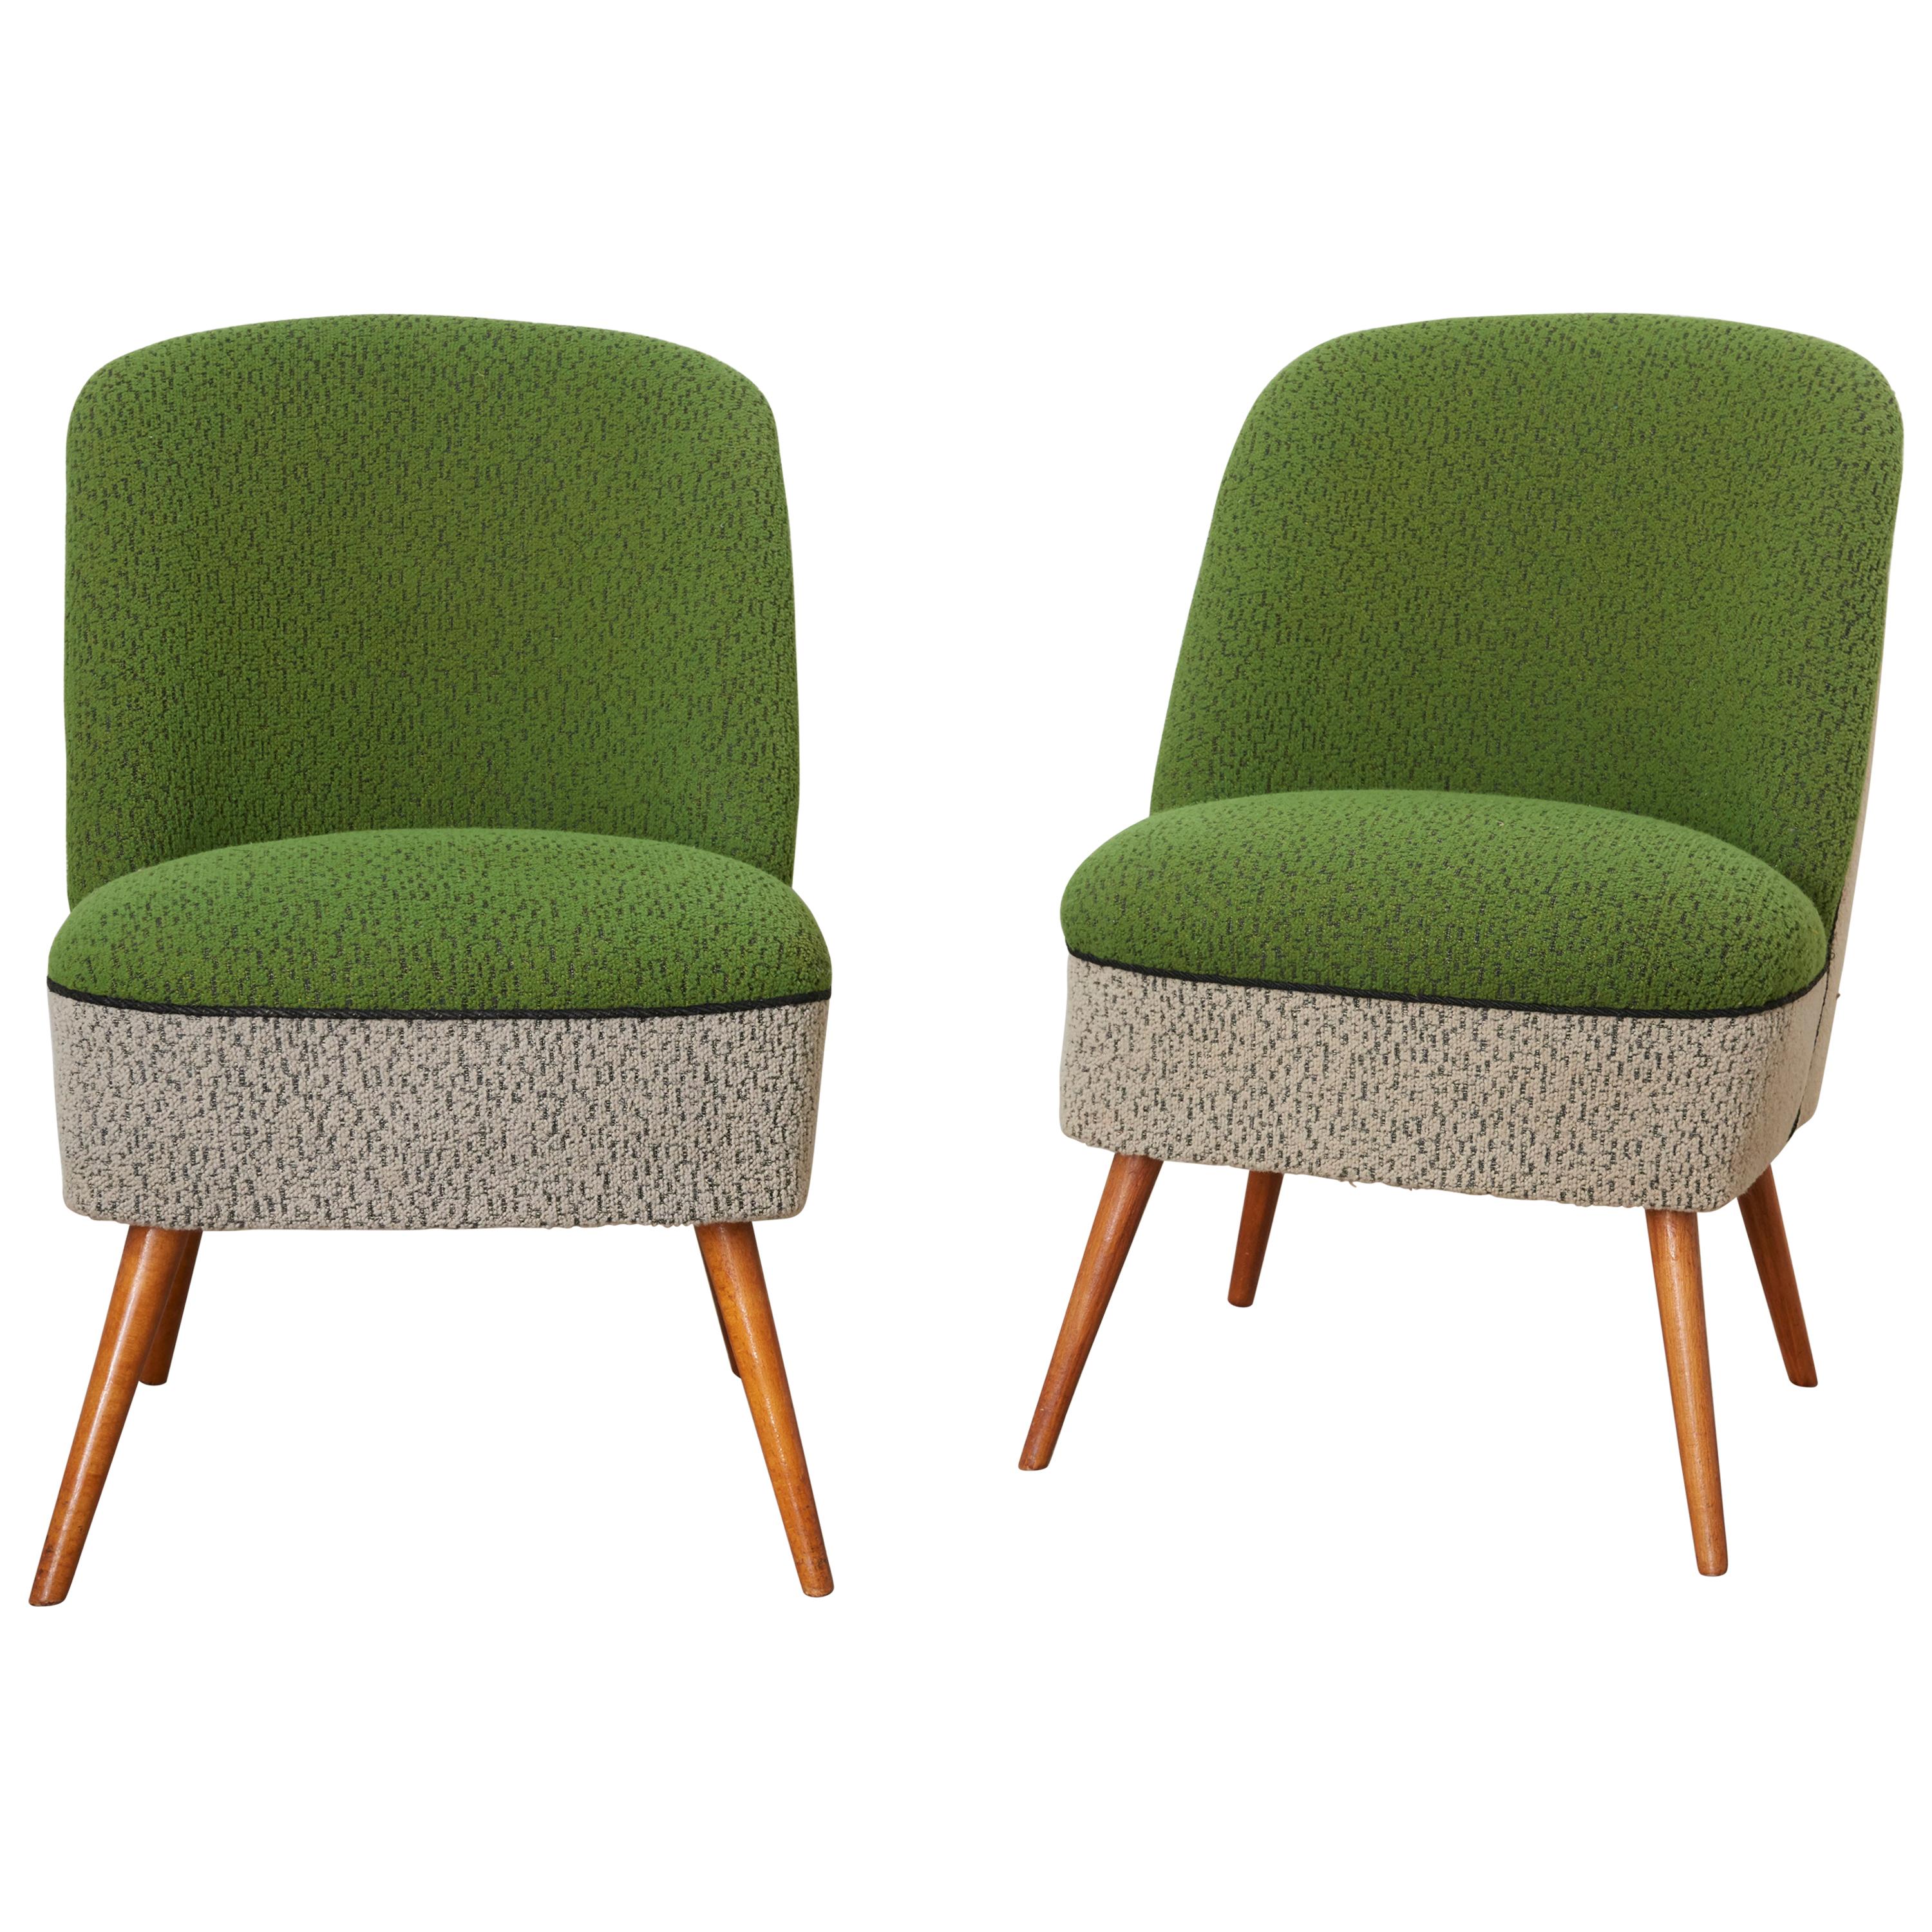 Sitting Group of Green and Gray 1950s Coctail Lounge Chairs, Switzerland